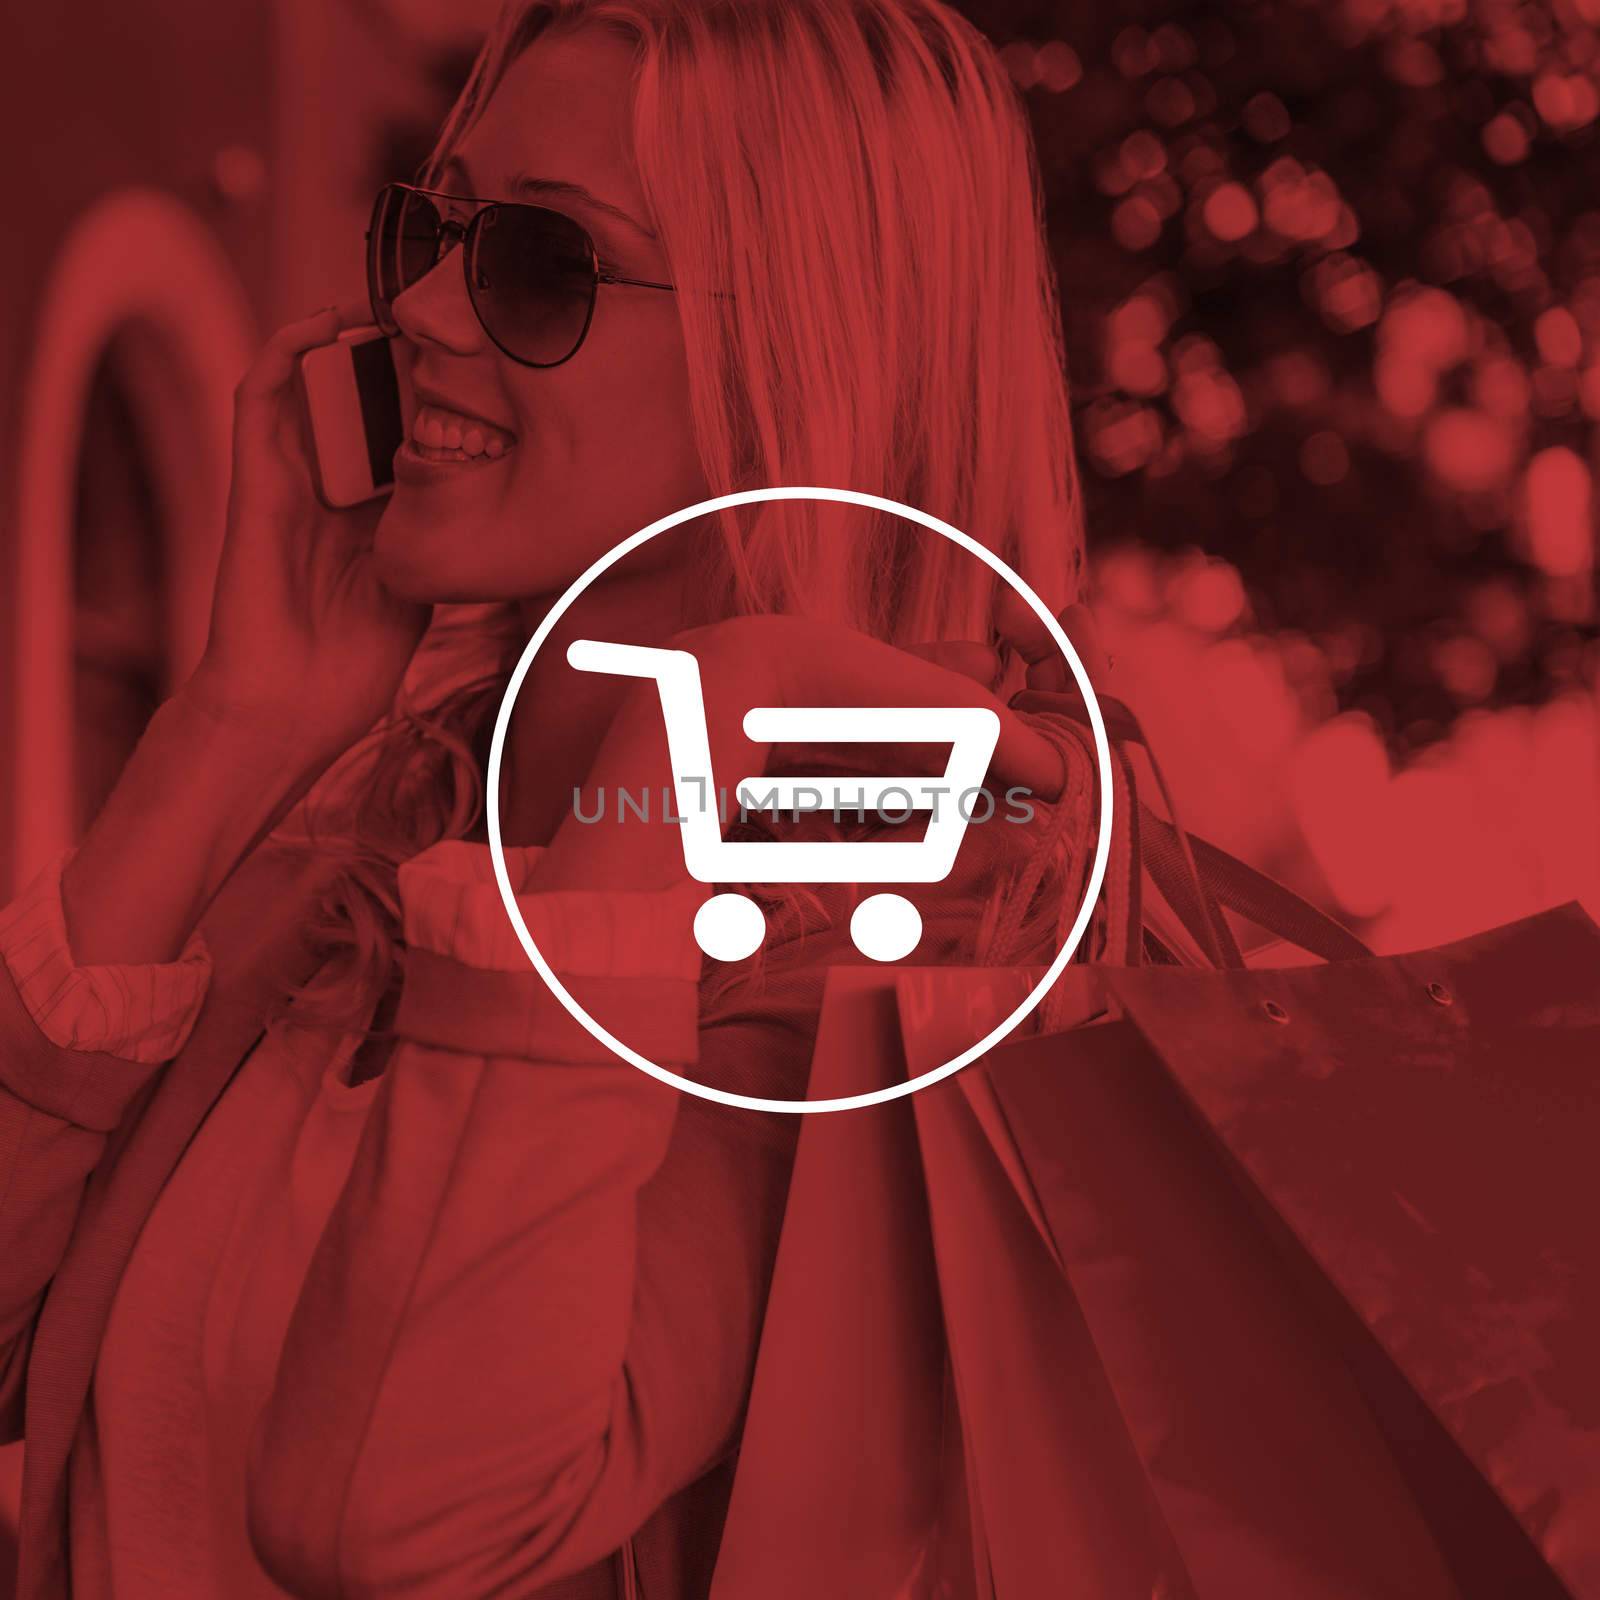 Pretty blonde talking on phone holding shopping bags against digital image of trolley